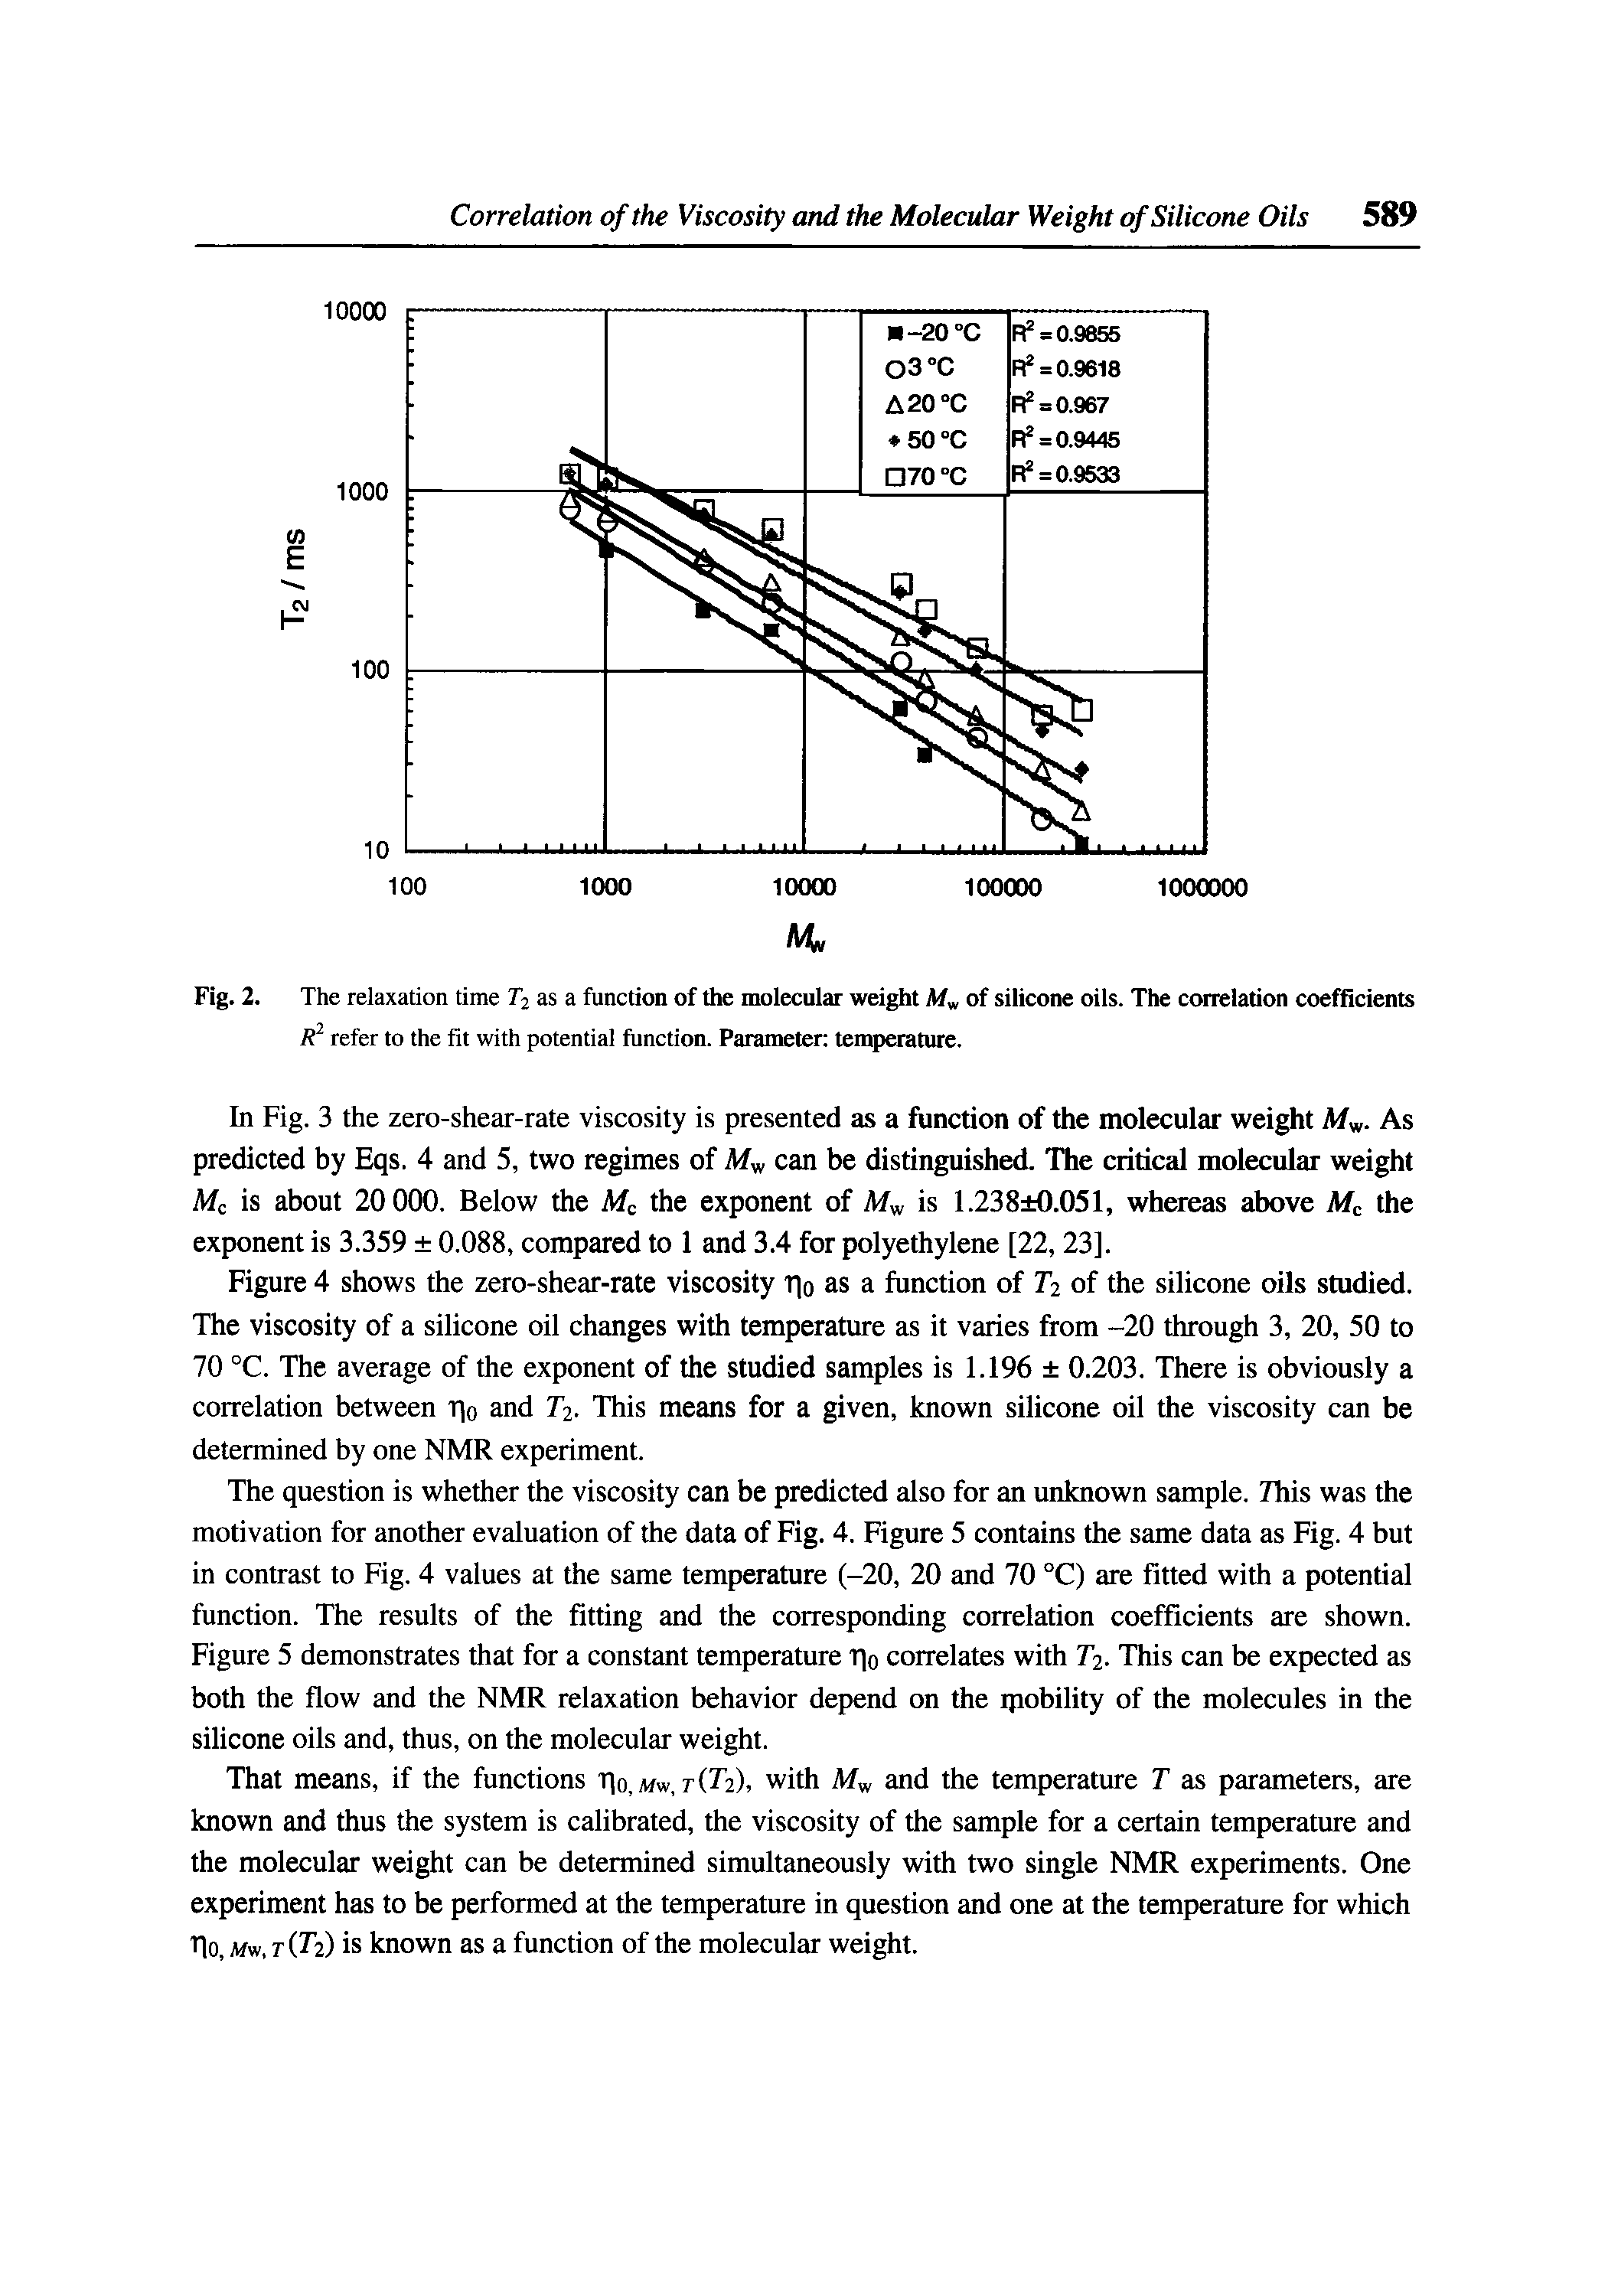 Fig. 2. The relaxation time T2 as a function of the molecular weight Itf, of silicone oils. The coirelation coefficients refer to the fit with potential function. Parameten tetqieratute.